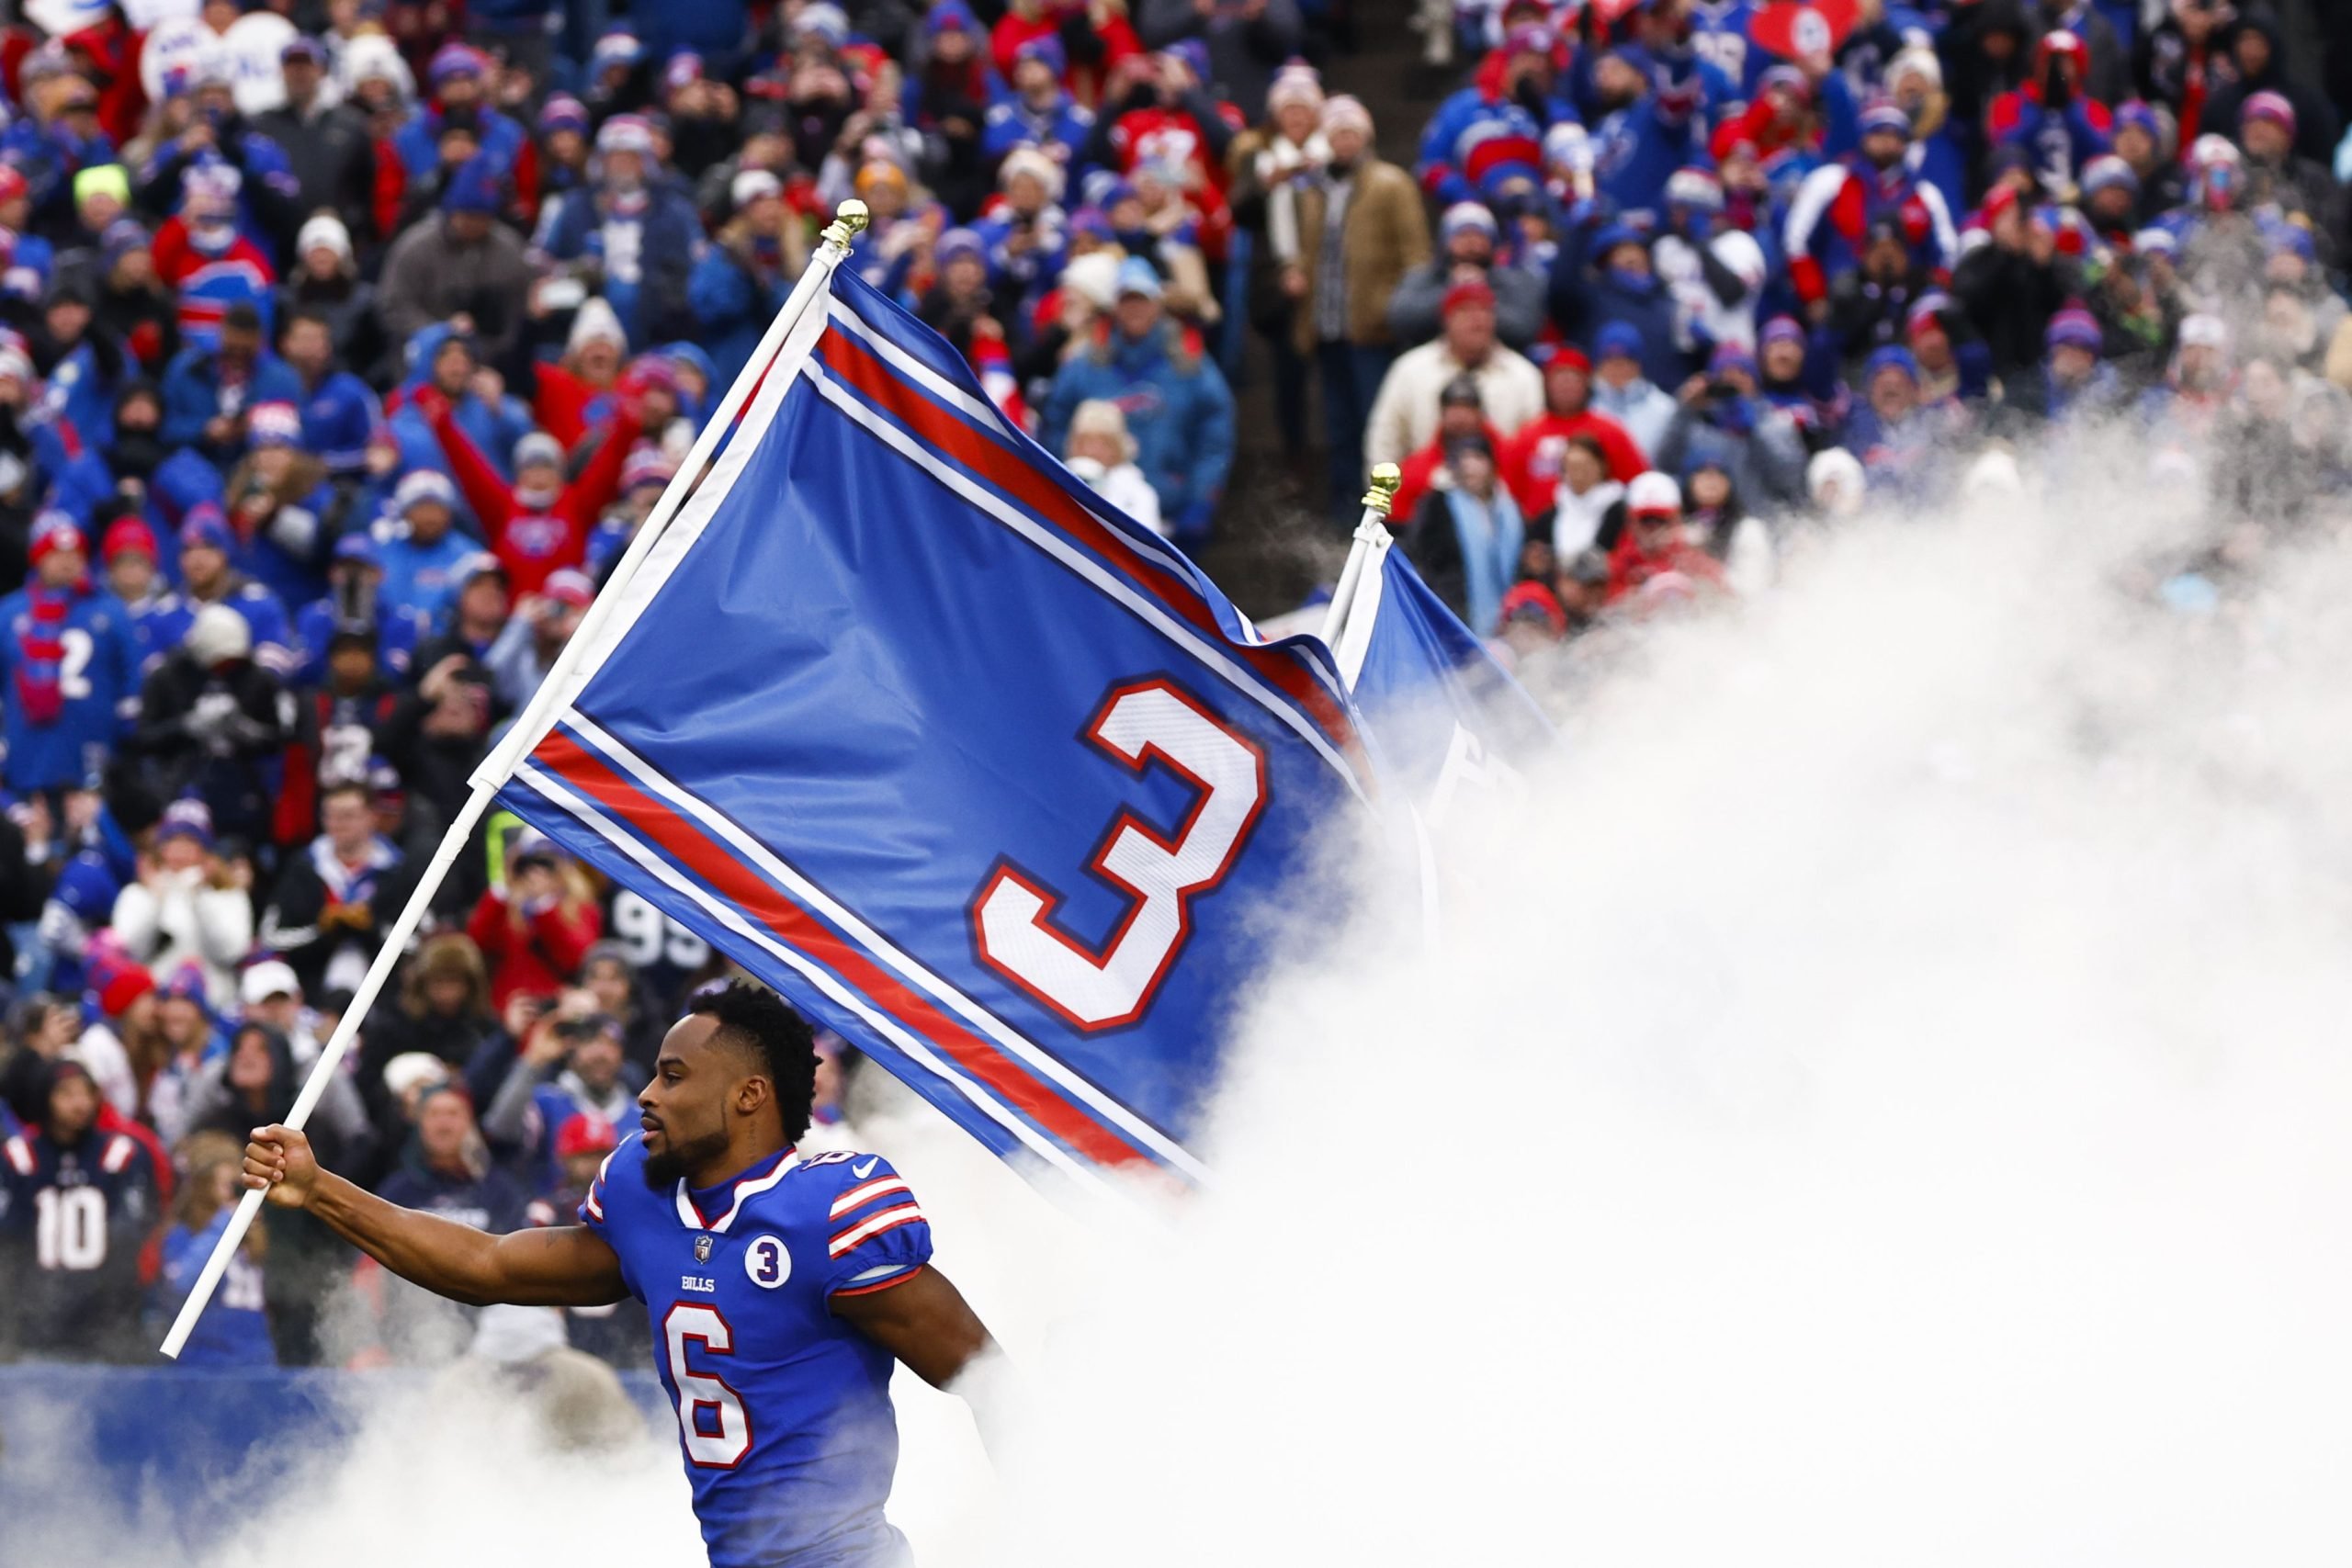 Buffalo Bills Rally on NFL Sunday, Cheeseheads Aren’t Happy with the Green Bay Packers - Casino.org